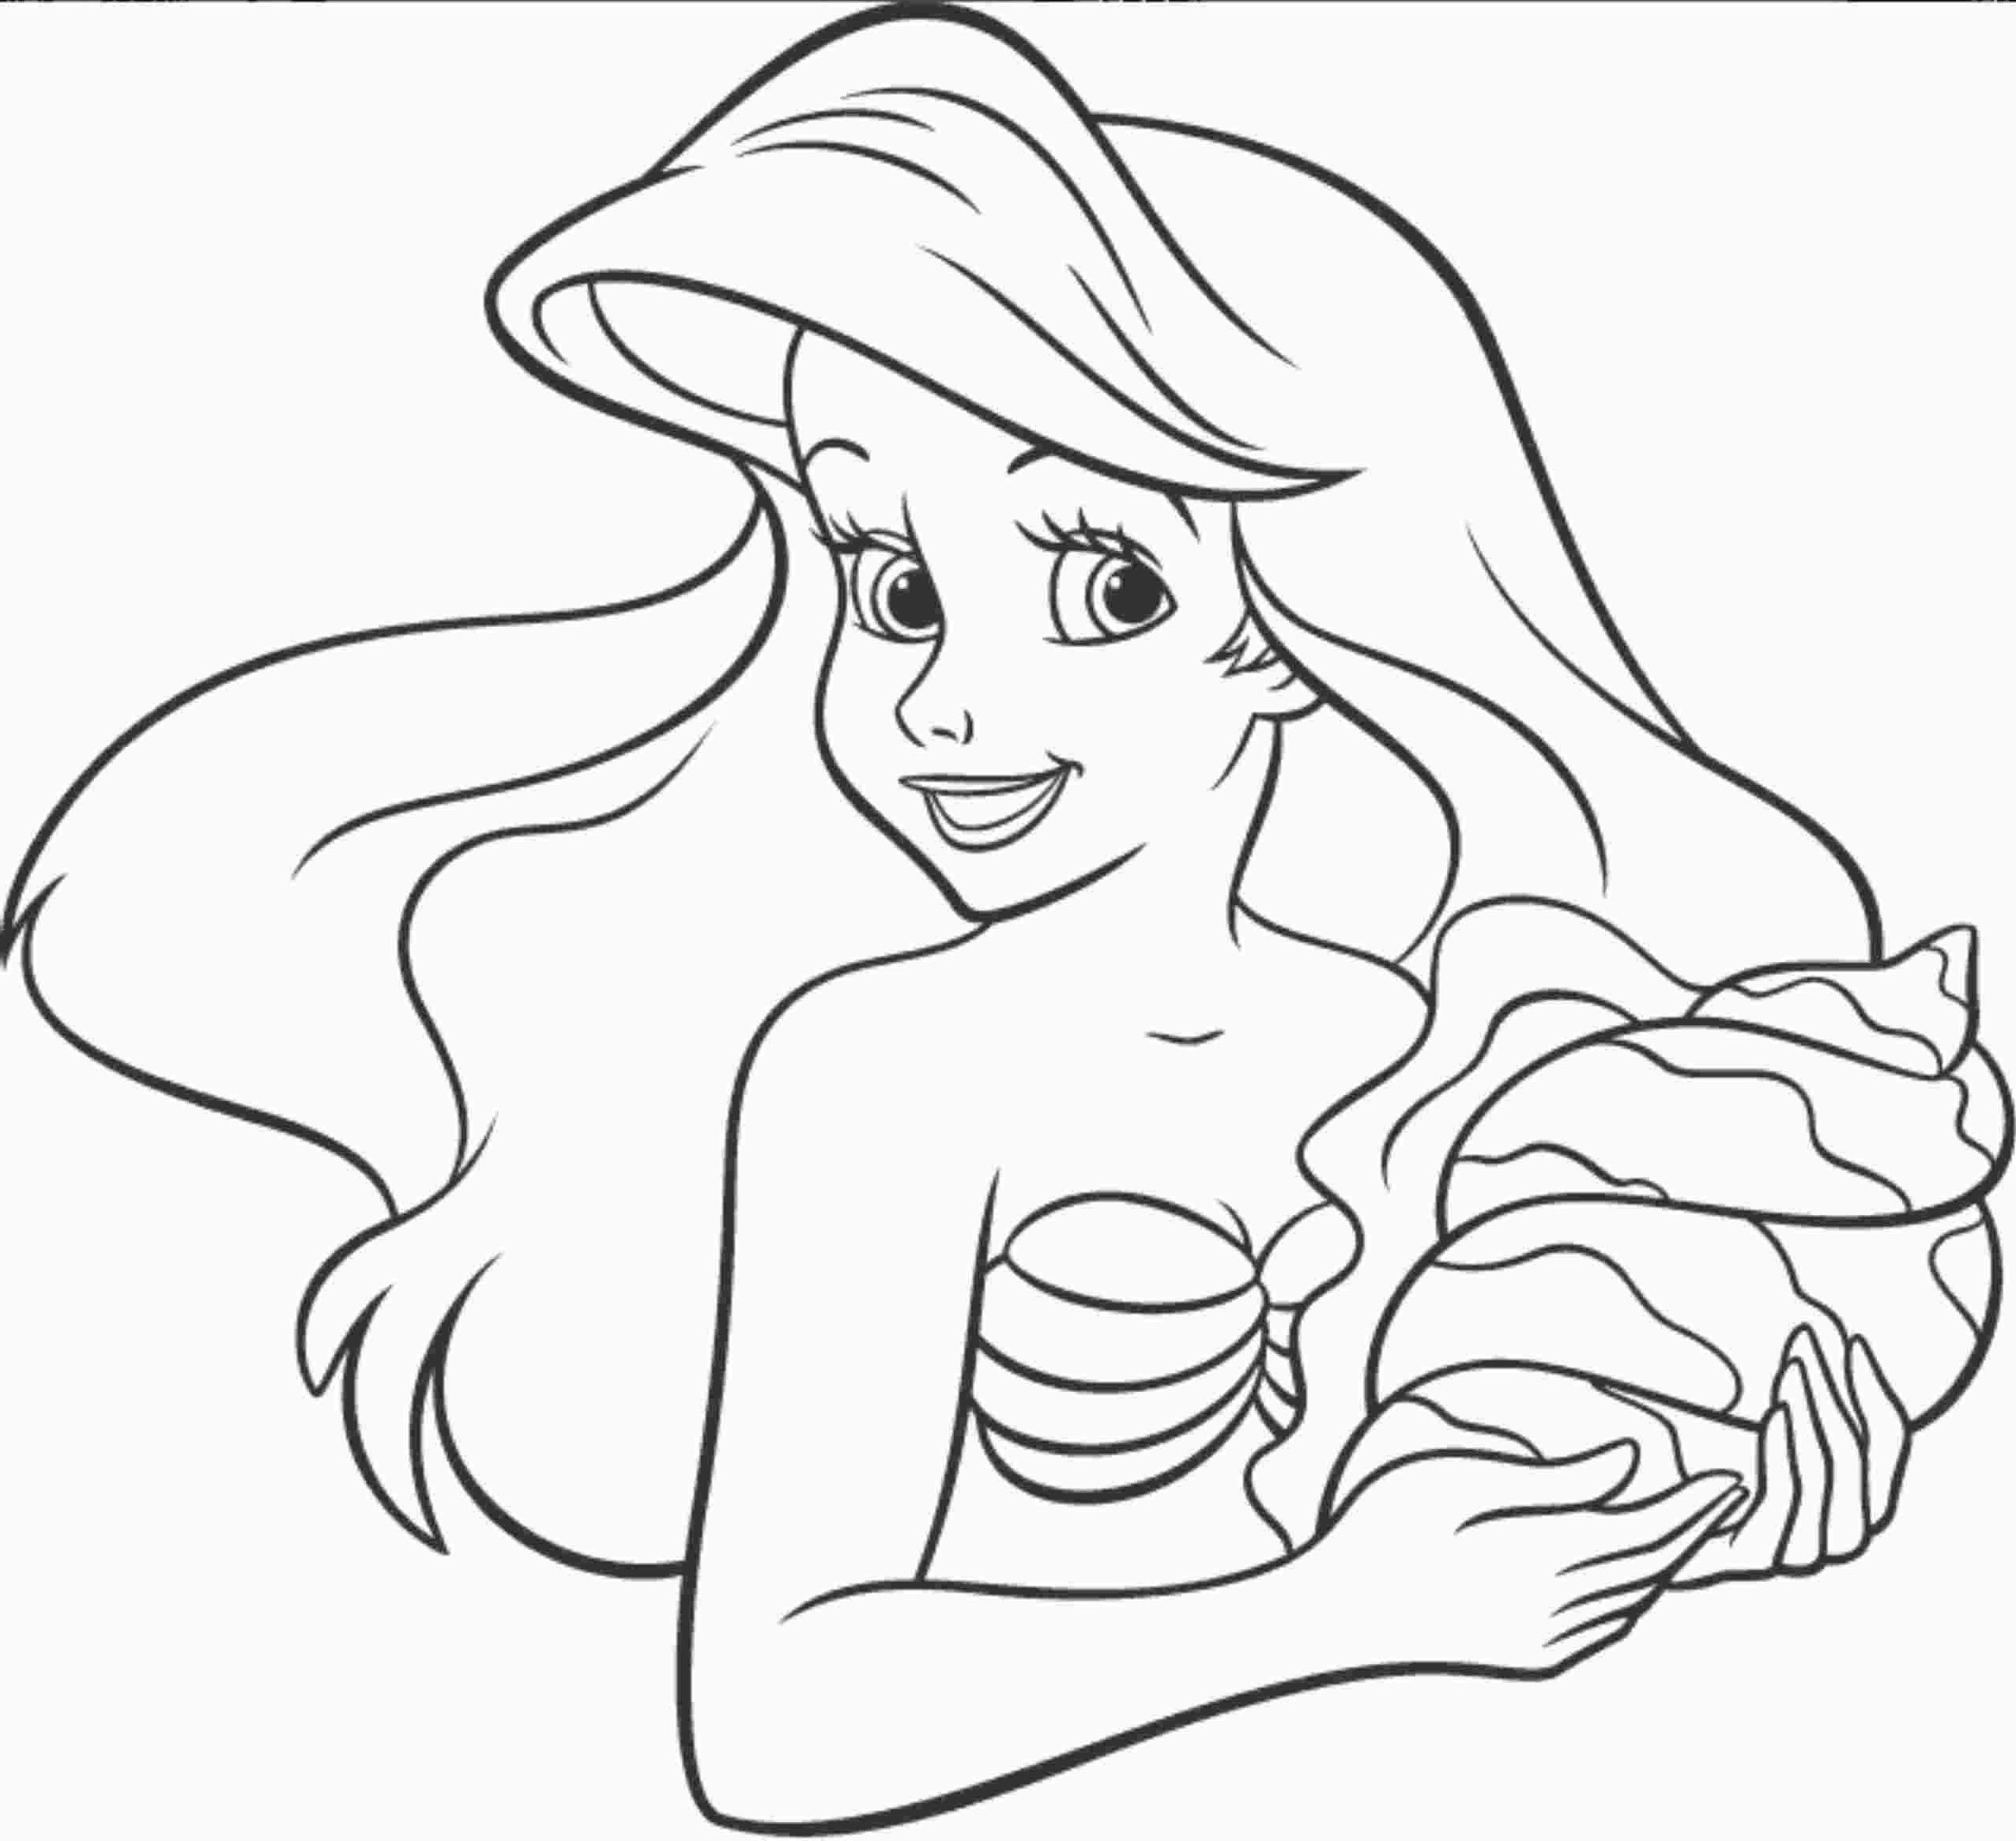 Little Mermaid Flounder Coloring Pages at GetColorings.com | Free ...